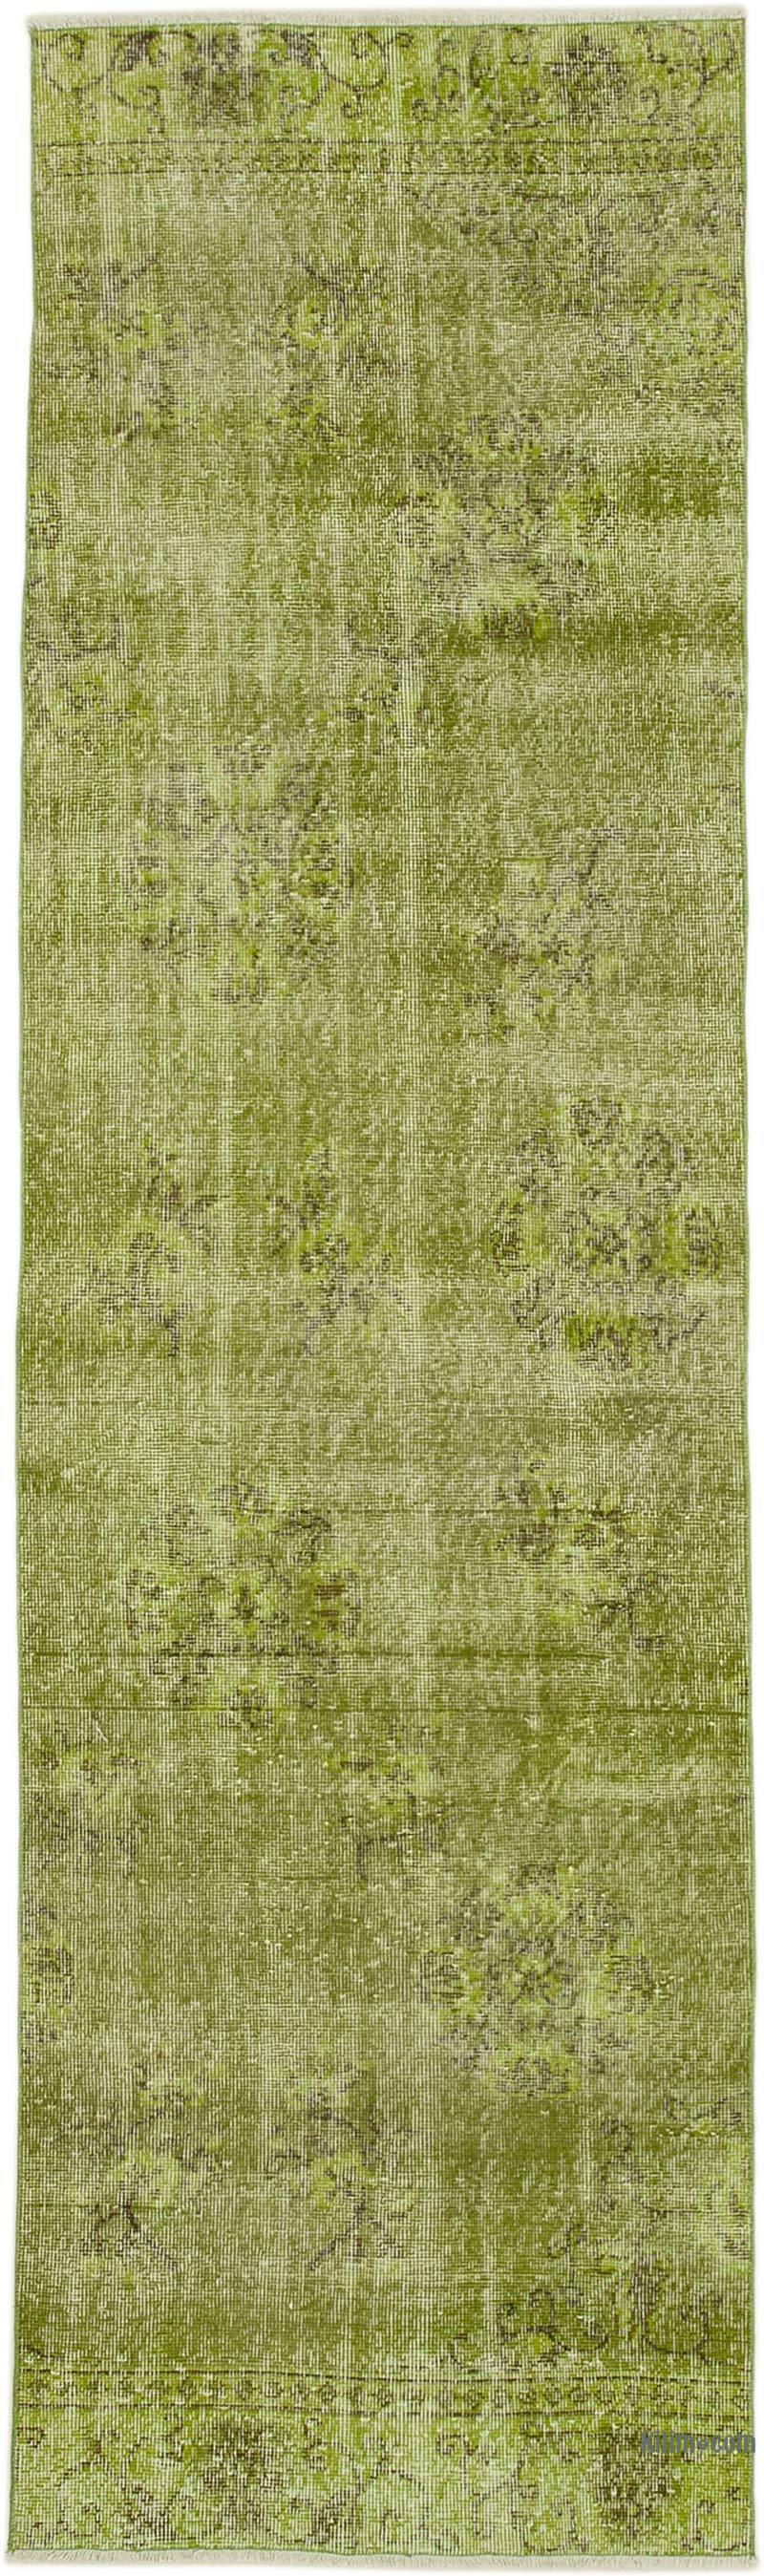 Green Over-dyed Turkish Vintage Runner Rug - 3'  x 10' 5" (36 in. x 125 in.) - K0052188